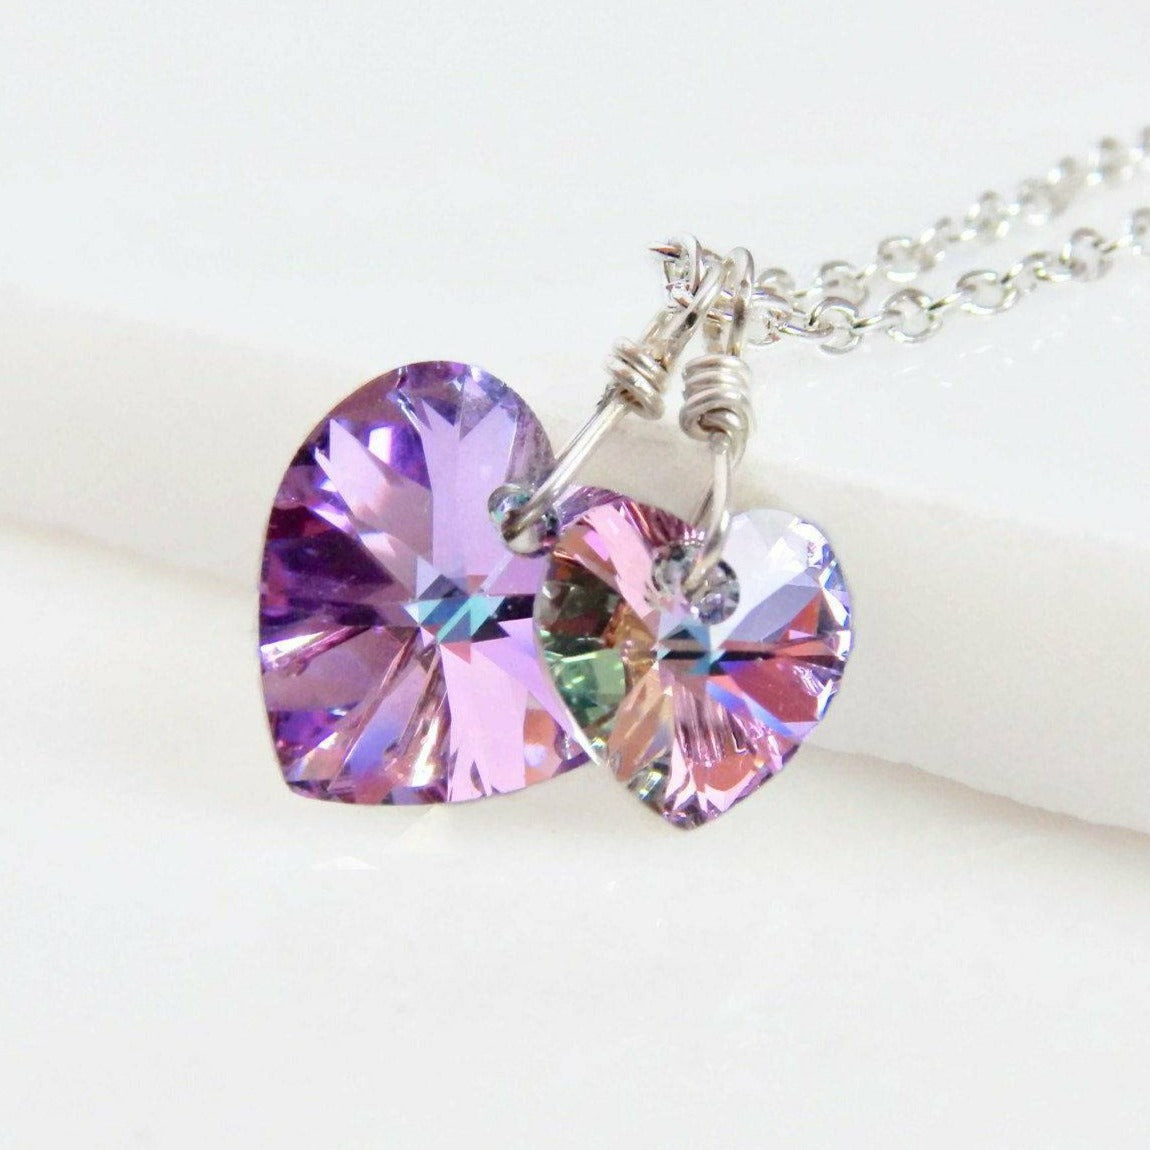 Two hearts necklace crystal necklace in light vitral